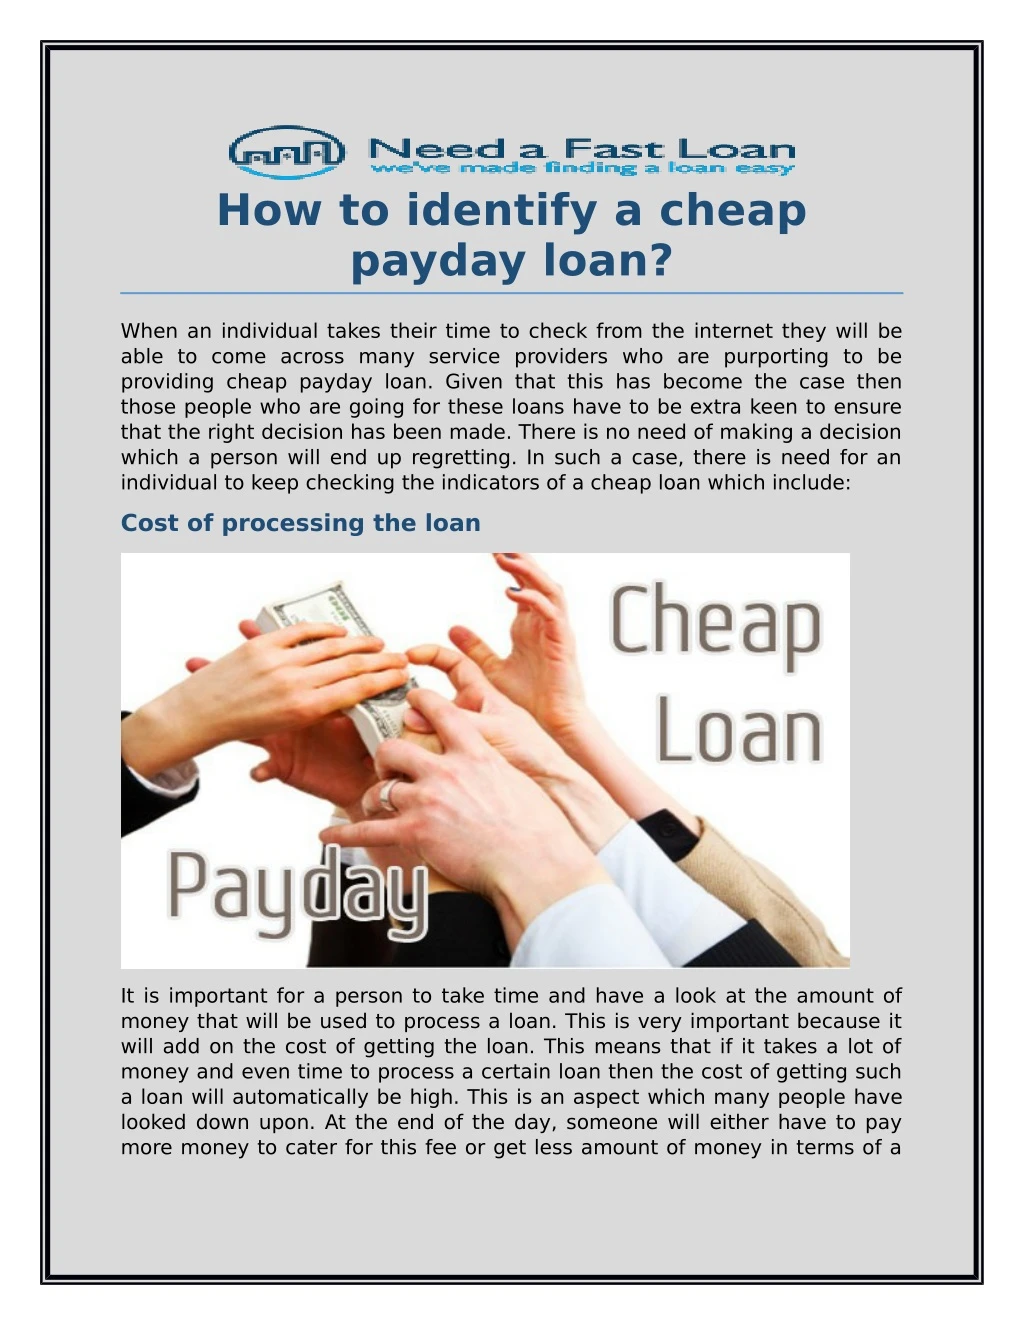 how to identify a cheap payday loan